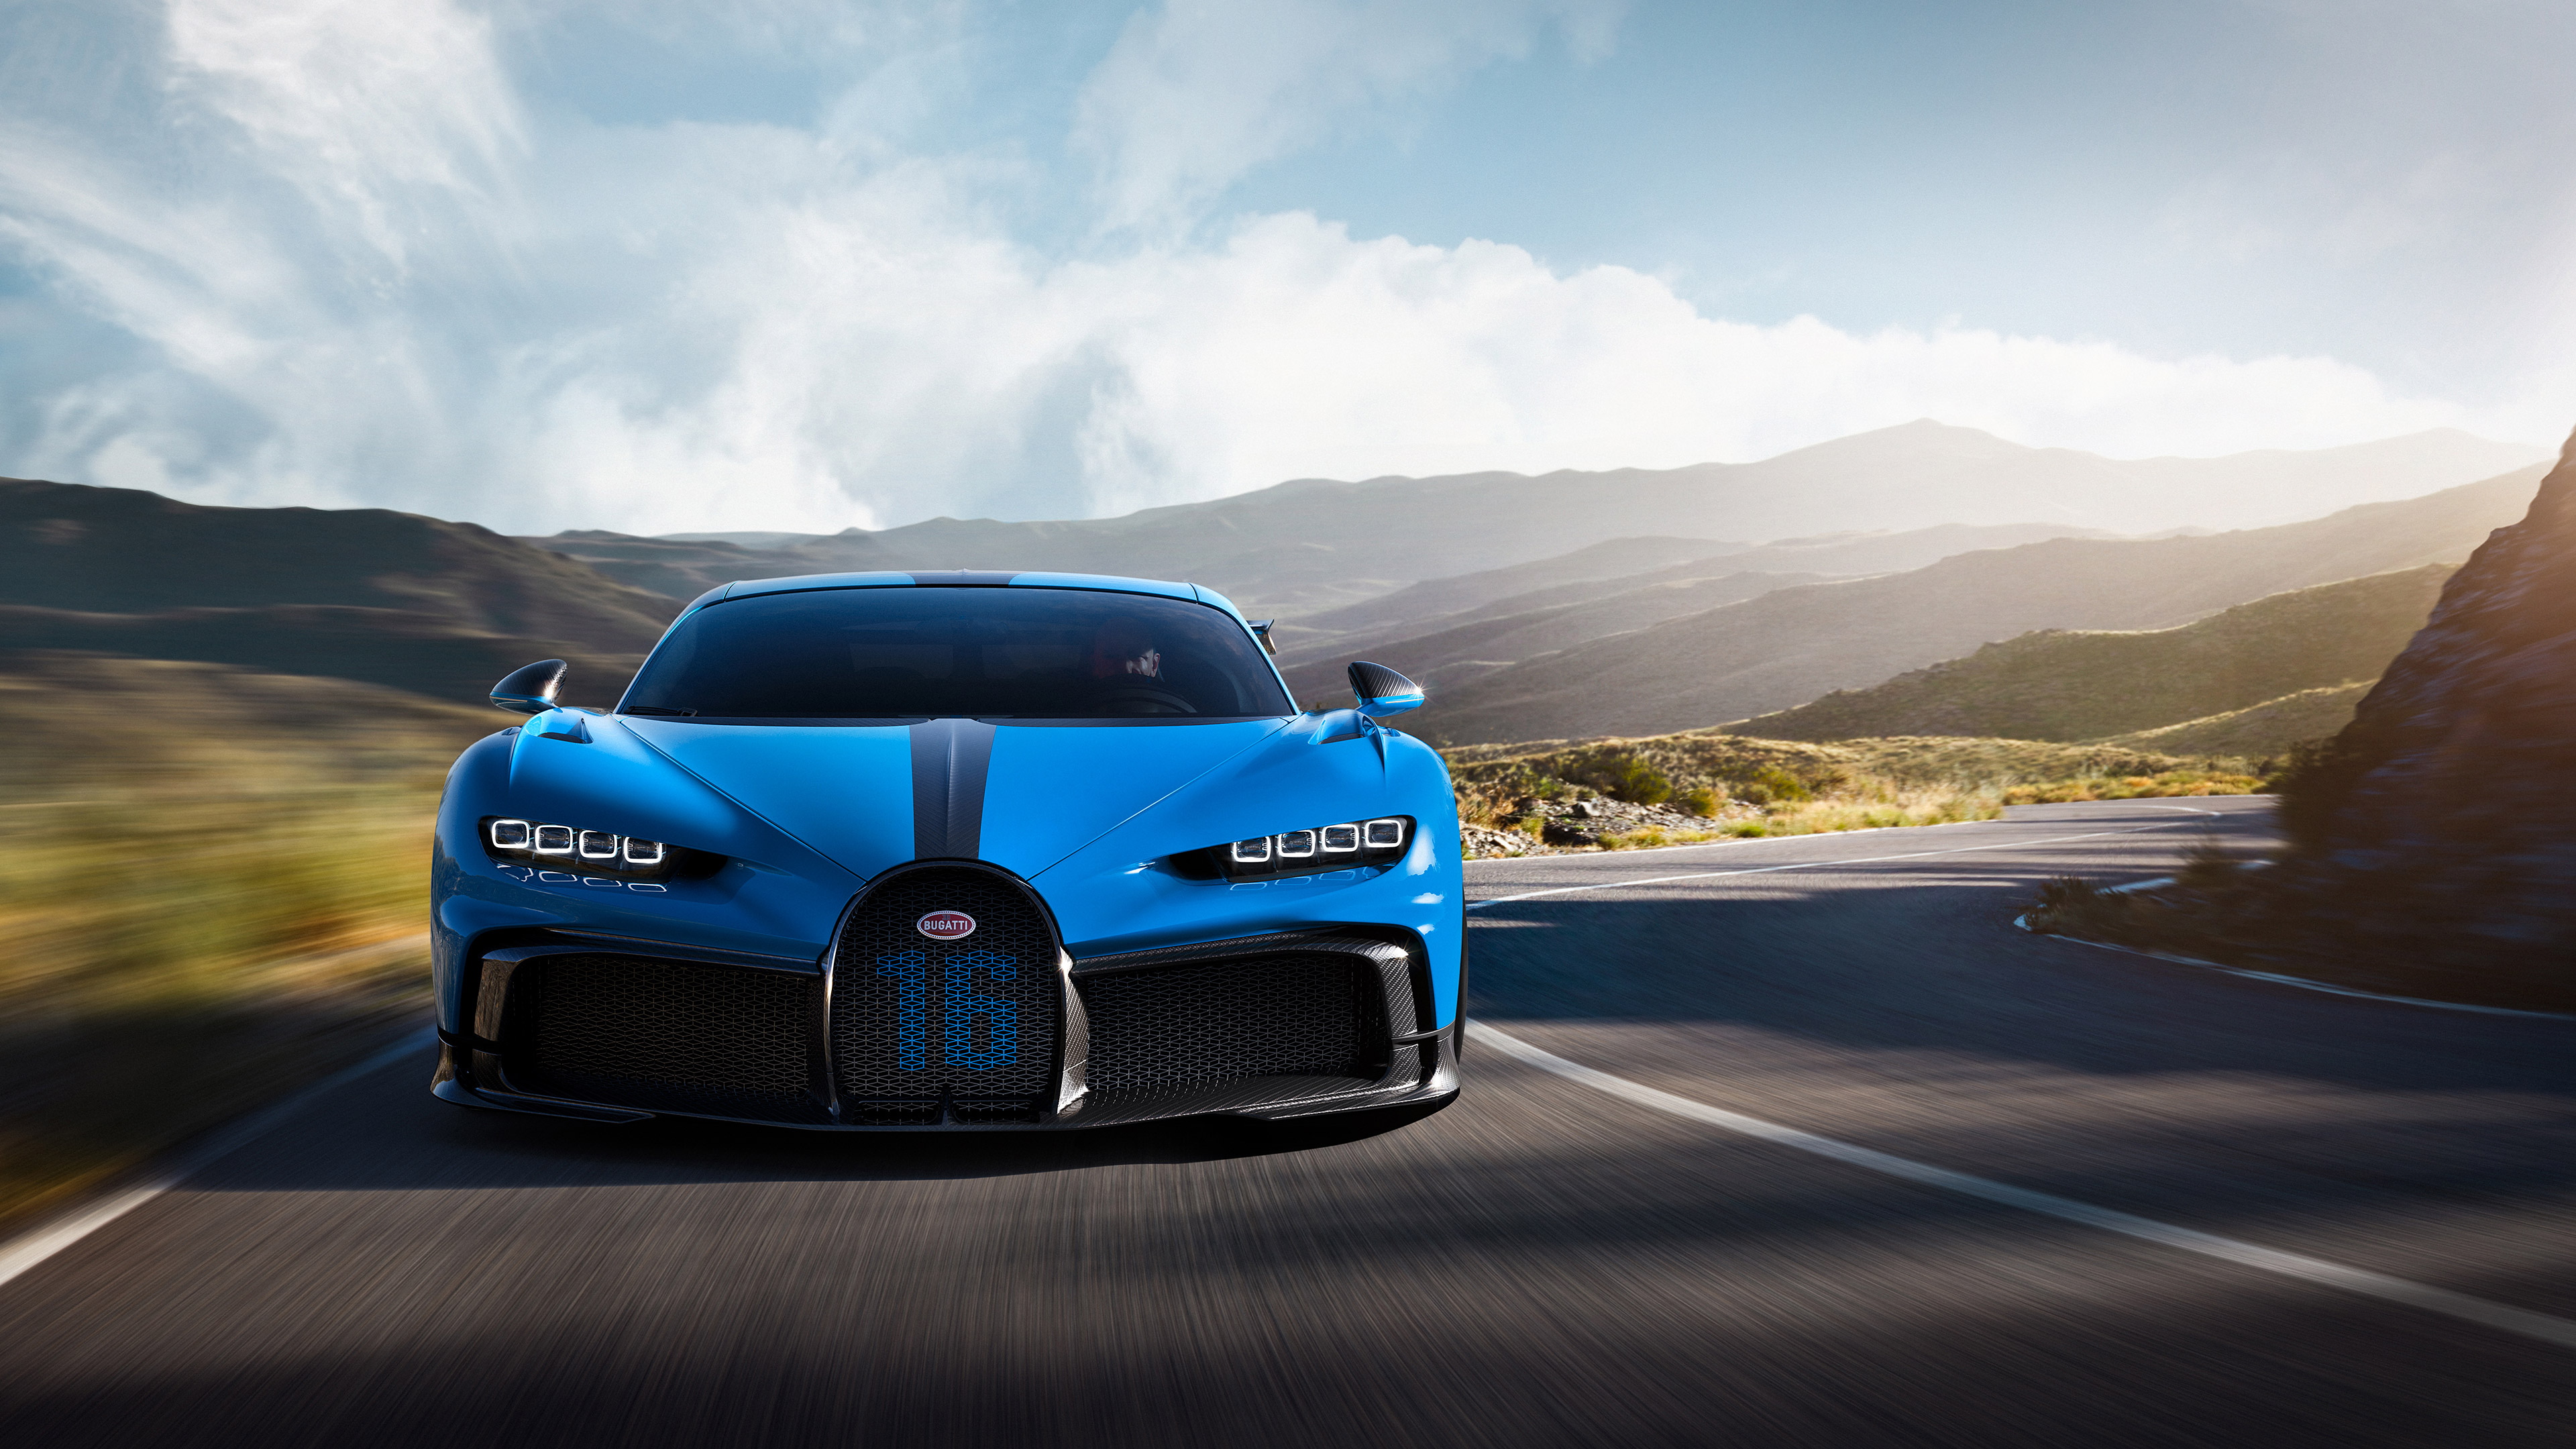 General 3840x2160 Bugatti Chiron Pur Sport car vehicle road motion blur frontal view Bugatti French Cars Volkswagen Group Hypercar